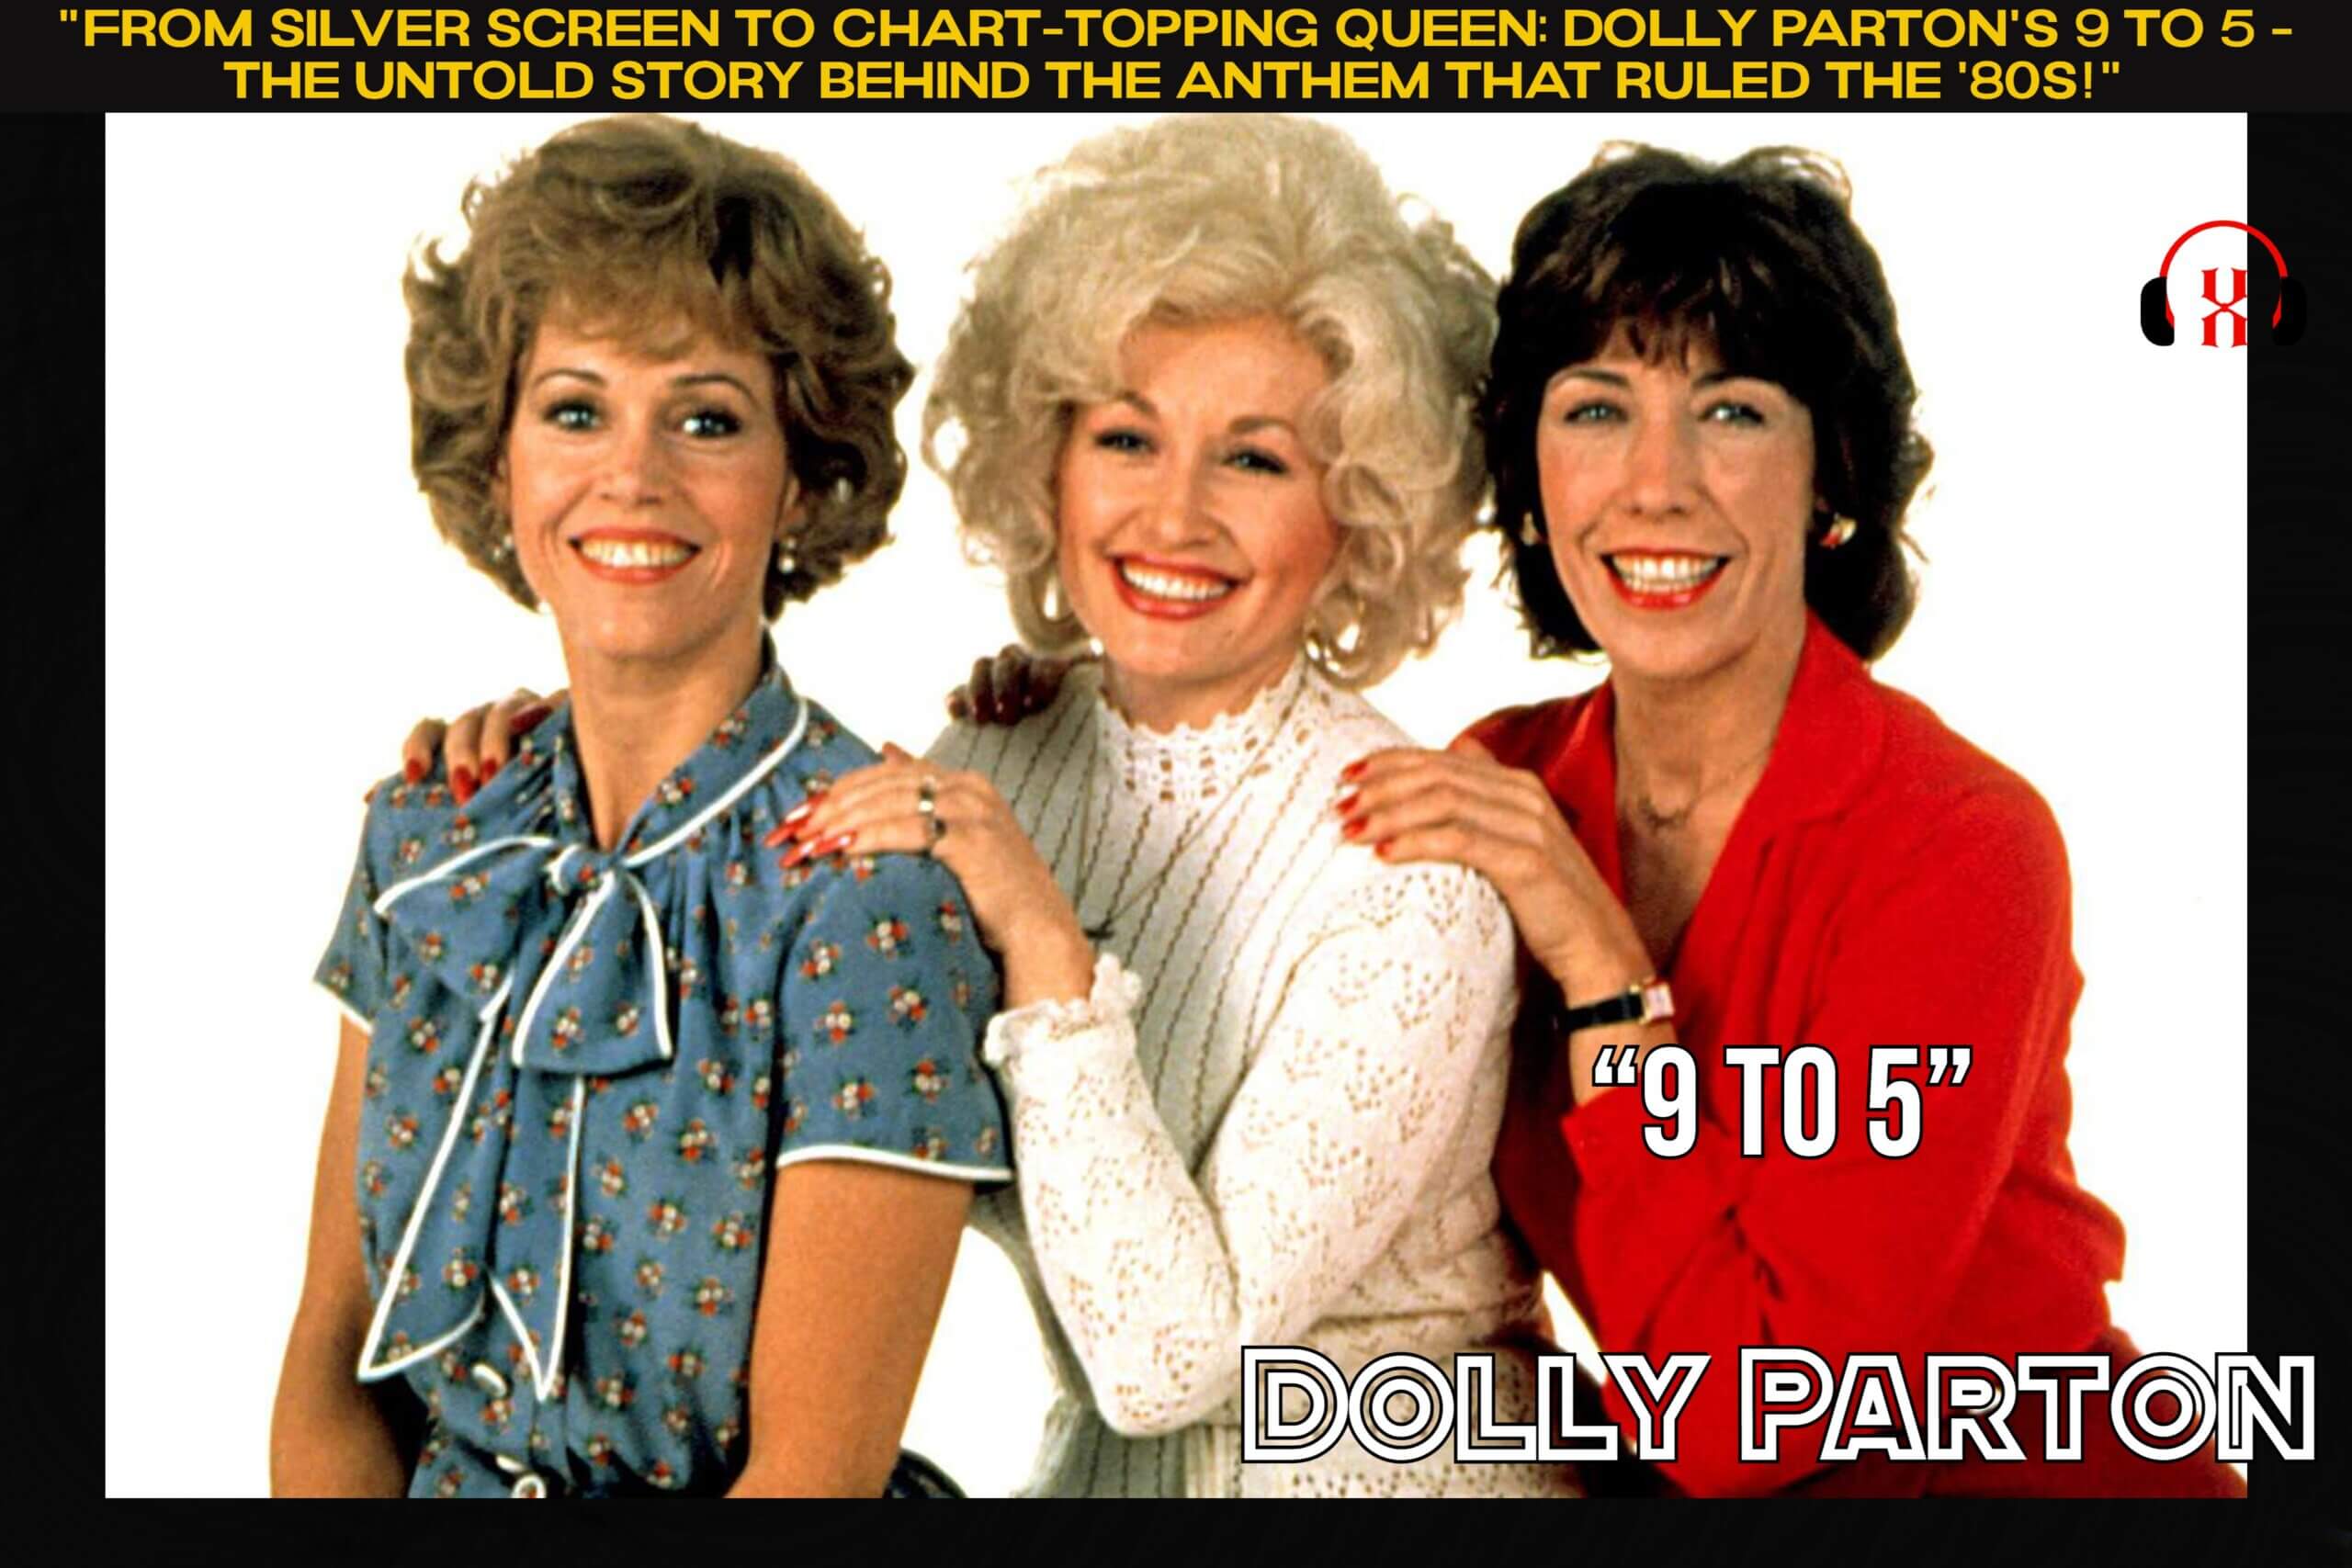 "From Silver Screen to Chart-Topping Queen: Dolly Parton's 9 to 5 - The Untold Story Behind the Anthem That Ruled the '80s!"